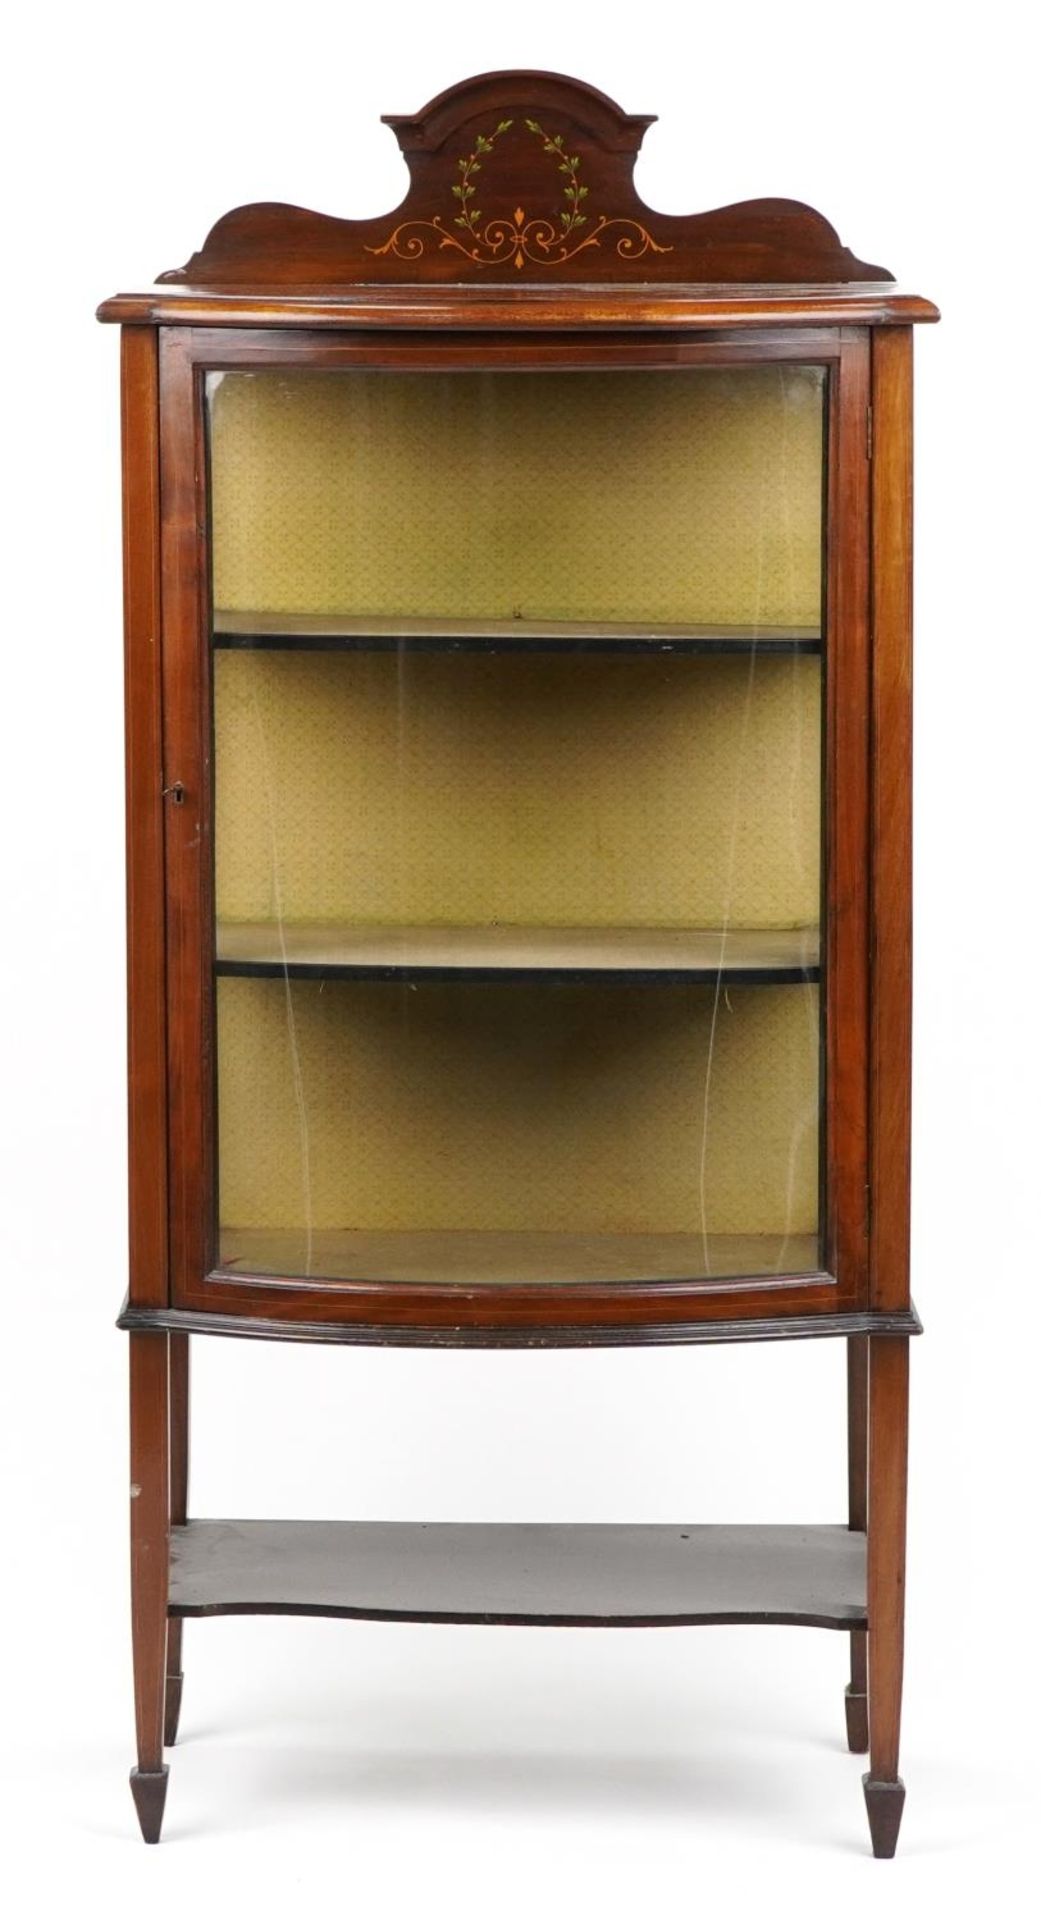 Inlaid mahogany bow front display cabinet on tapering legs hand painted with foliage, 141cm H x 64cm - Image 2 of 5